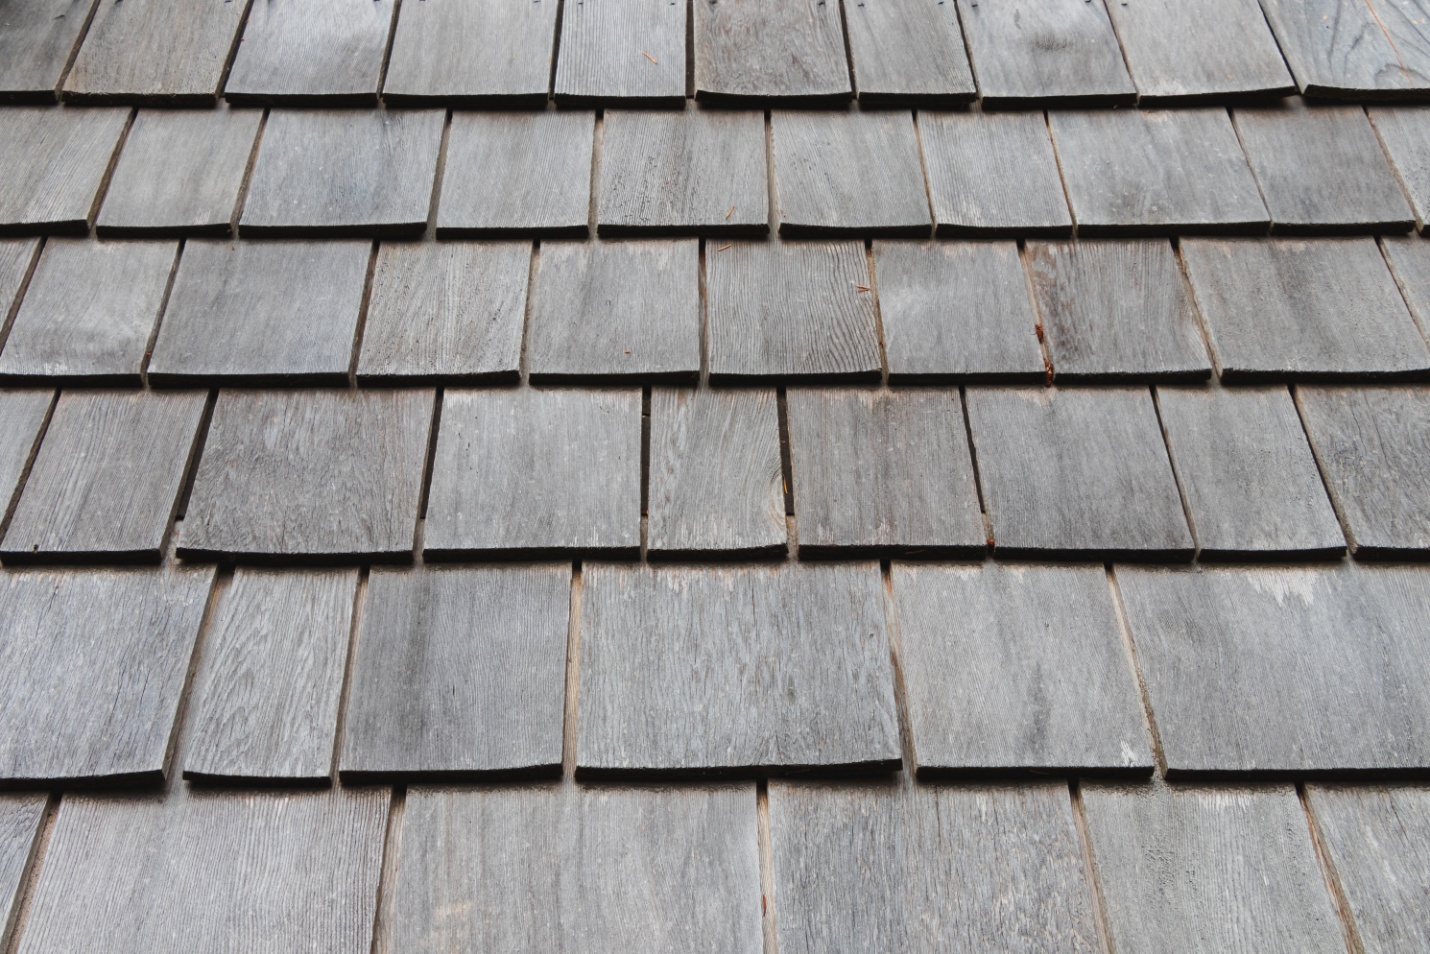 Faded shingles can be replaced during roof repairs in Rolling Hills.